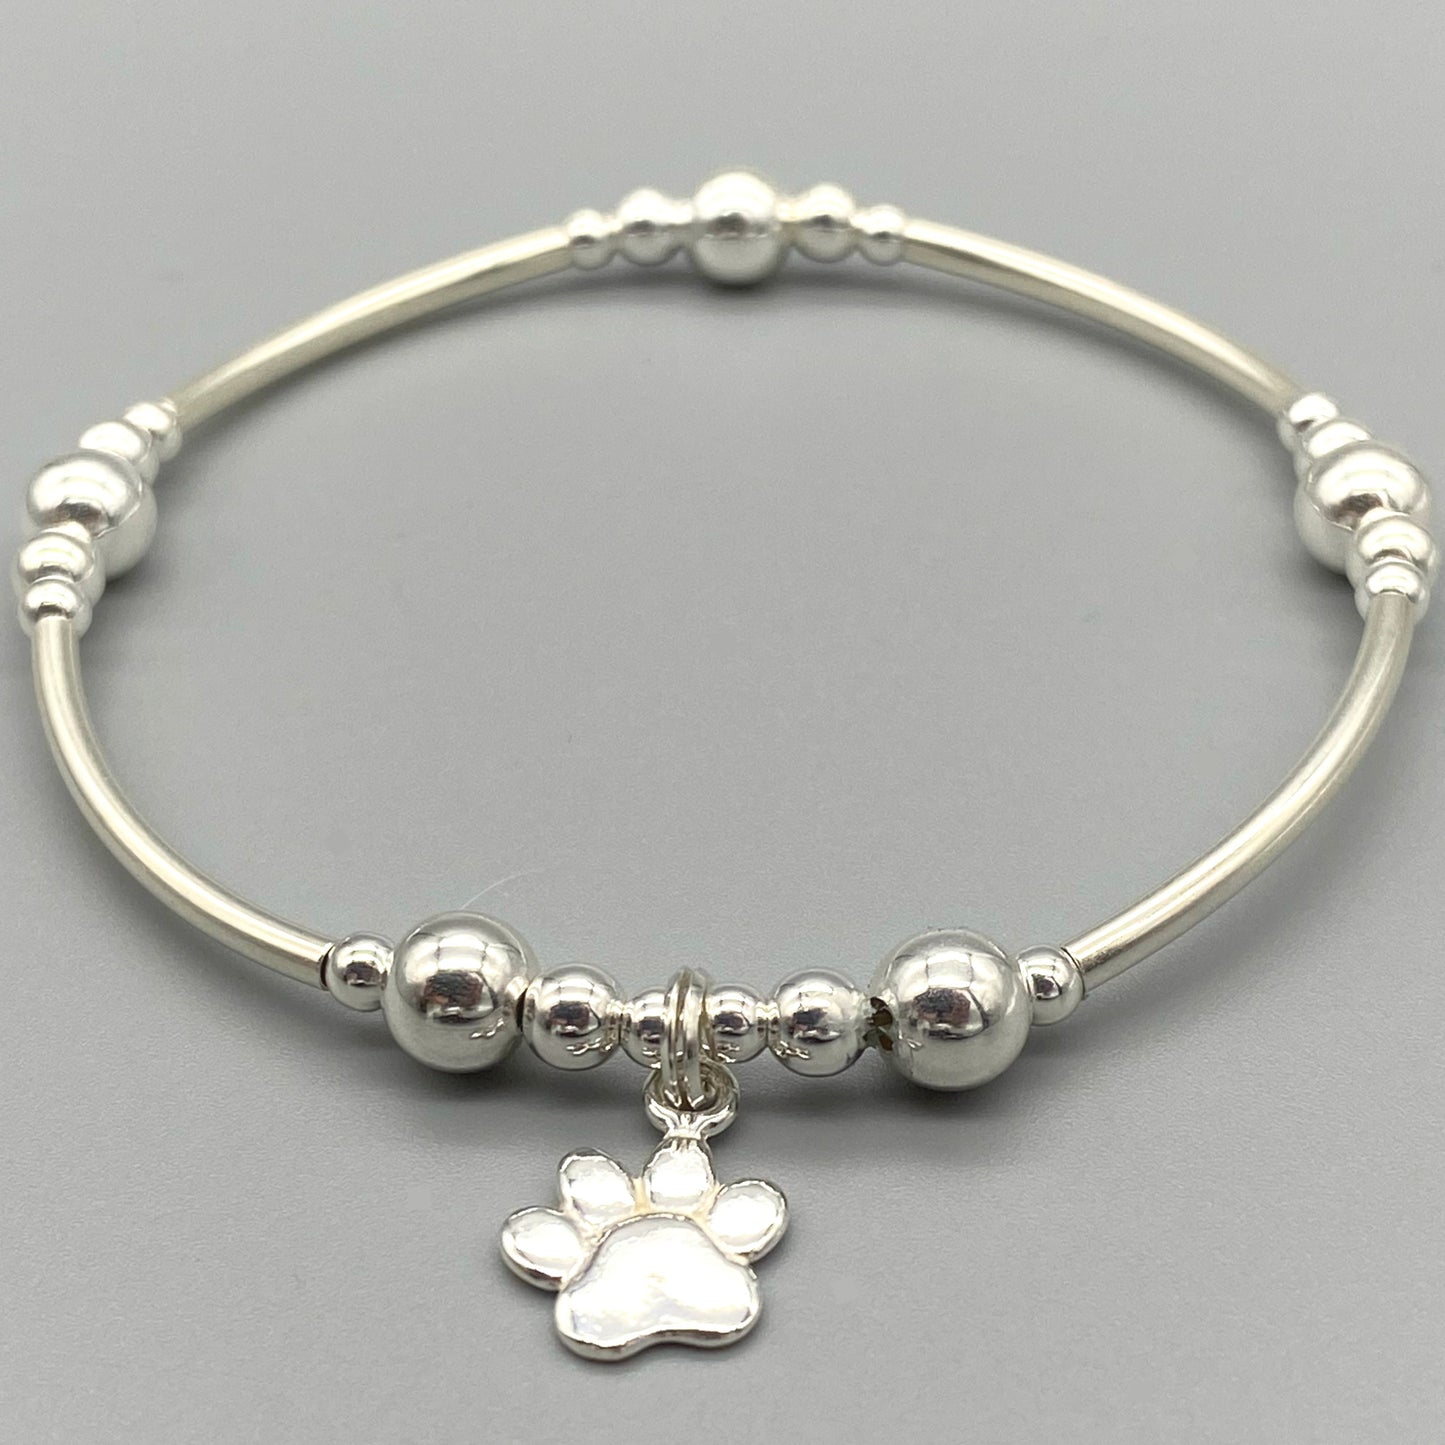 Cat paw charm women's sterling silver stacking bracelet by My Silver Wish